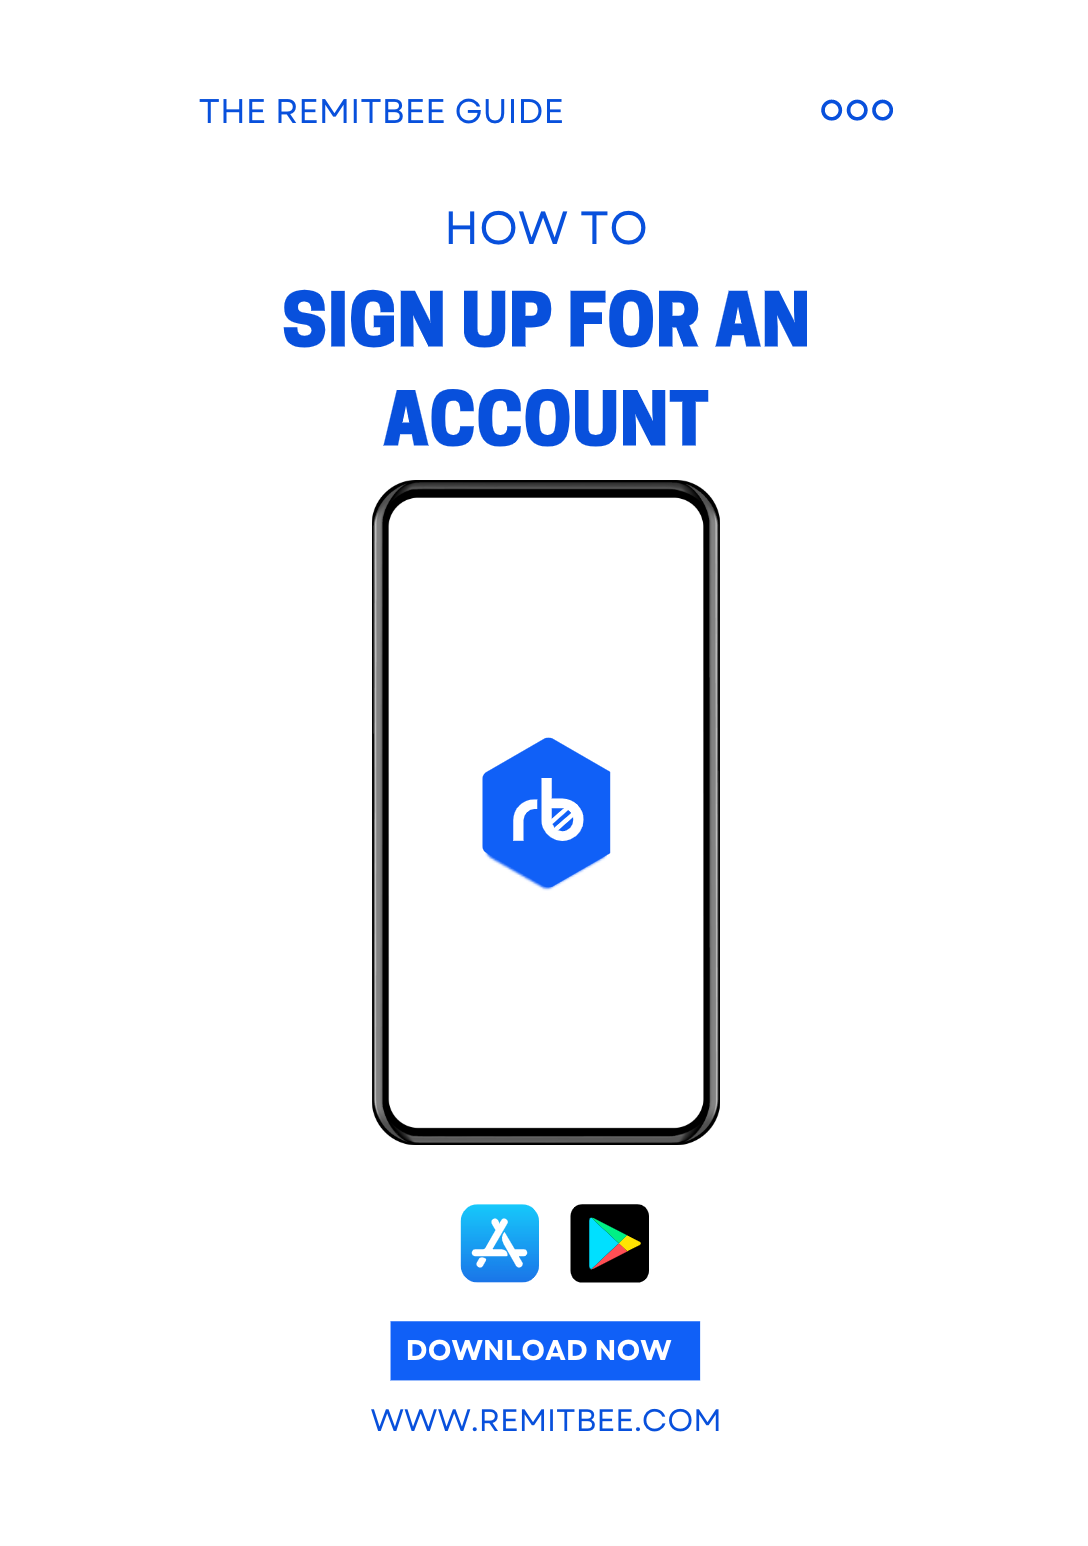 Sign up for account 1